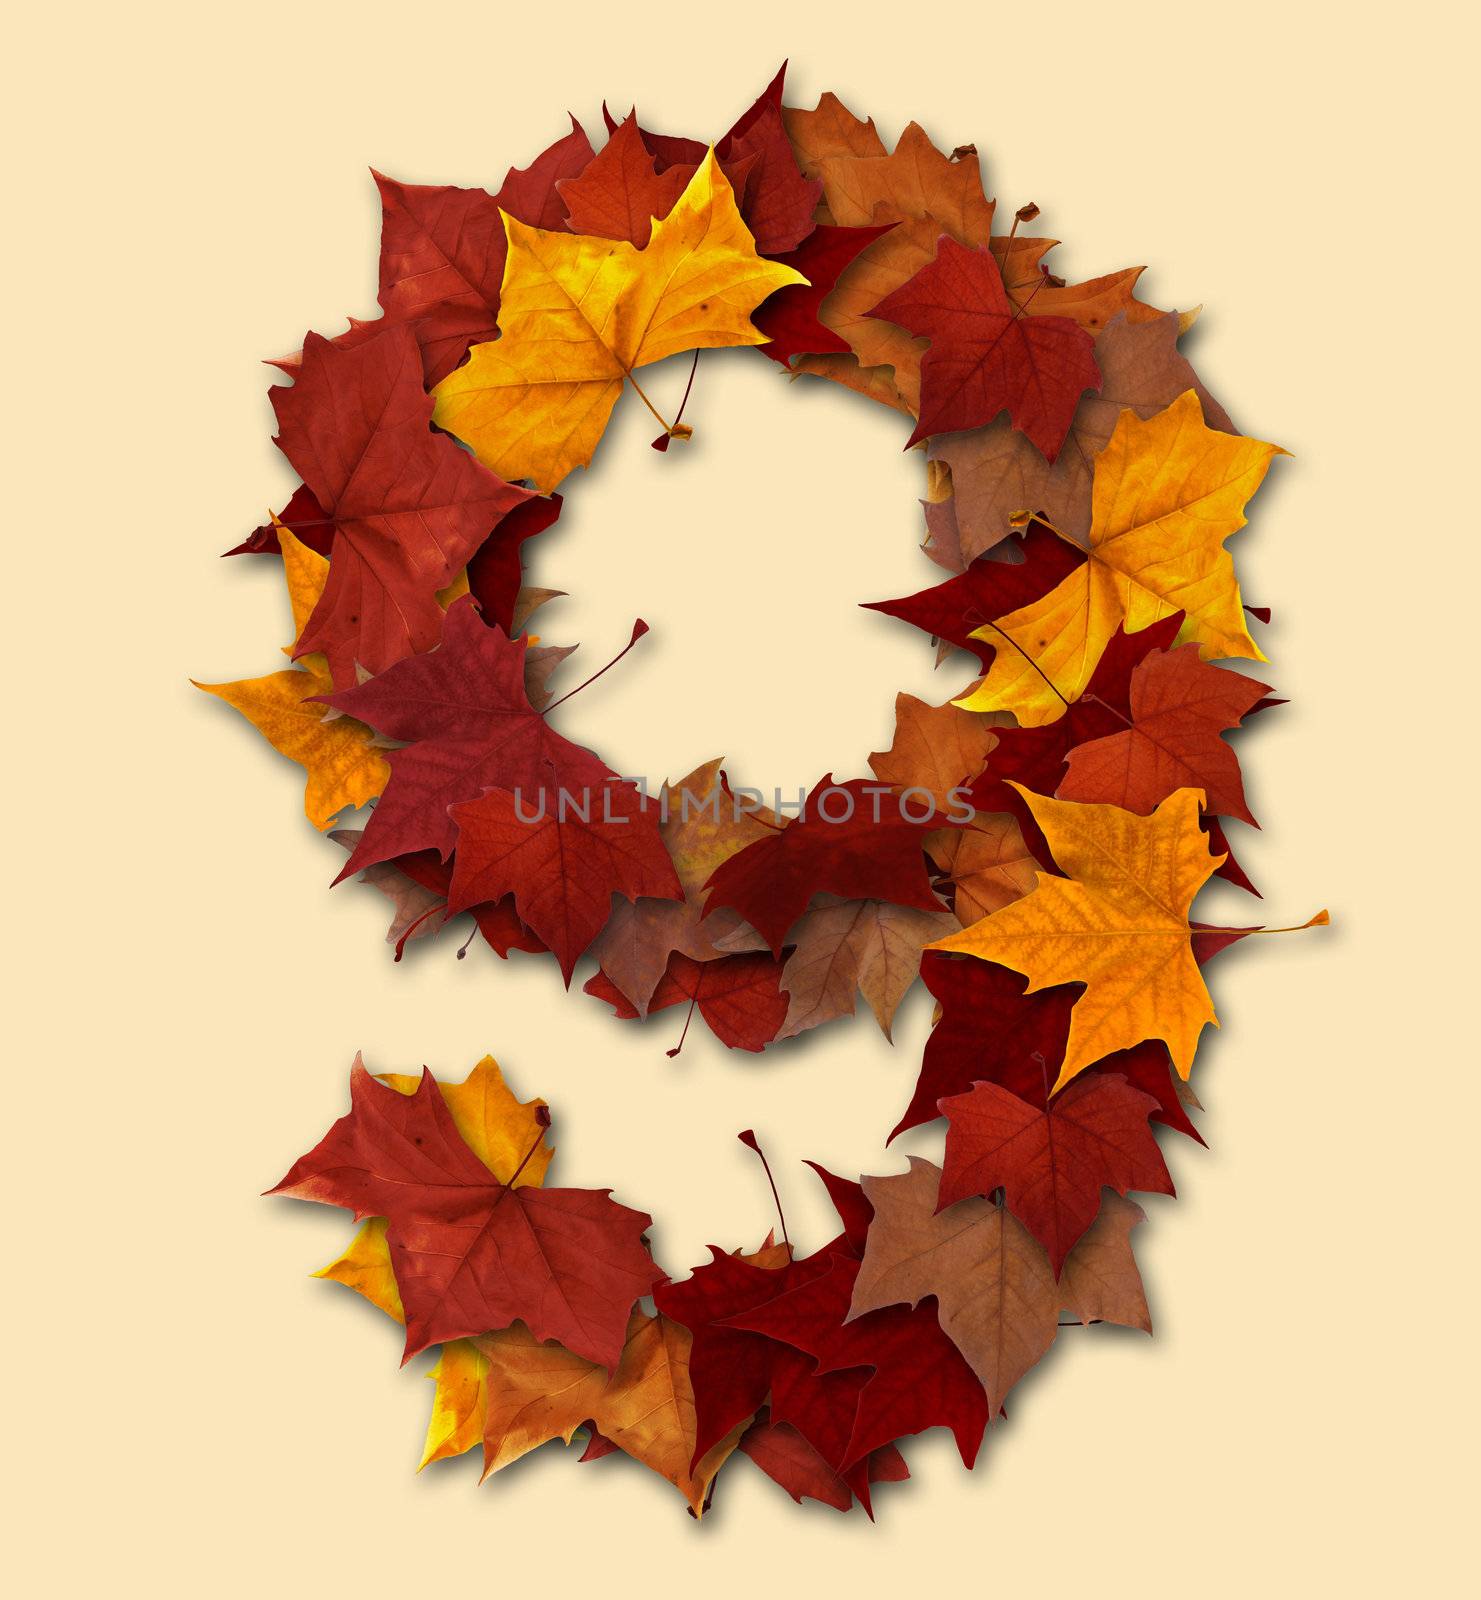 Number 9 drop shadow made with autumn leaves Isolated with clipping path, so you can easily cut it out and place over the top of a design. Find others types in our portfolio to compose your own words.